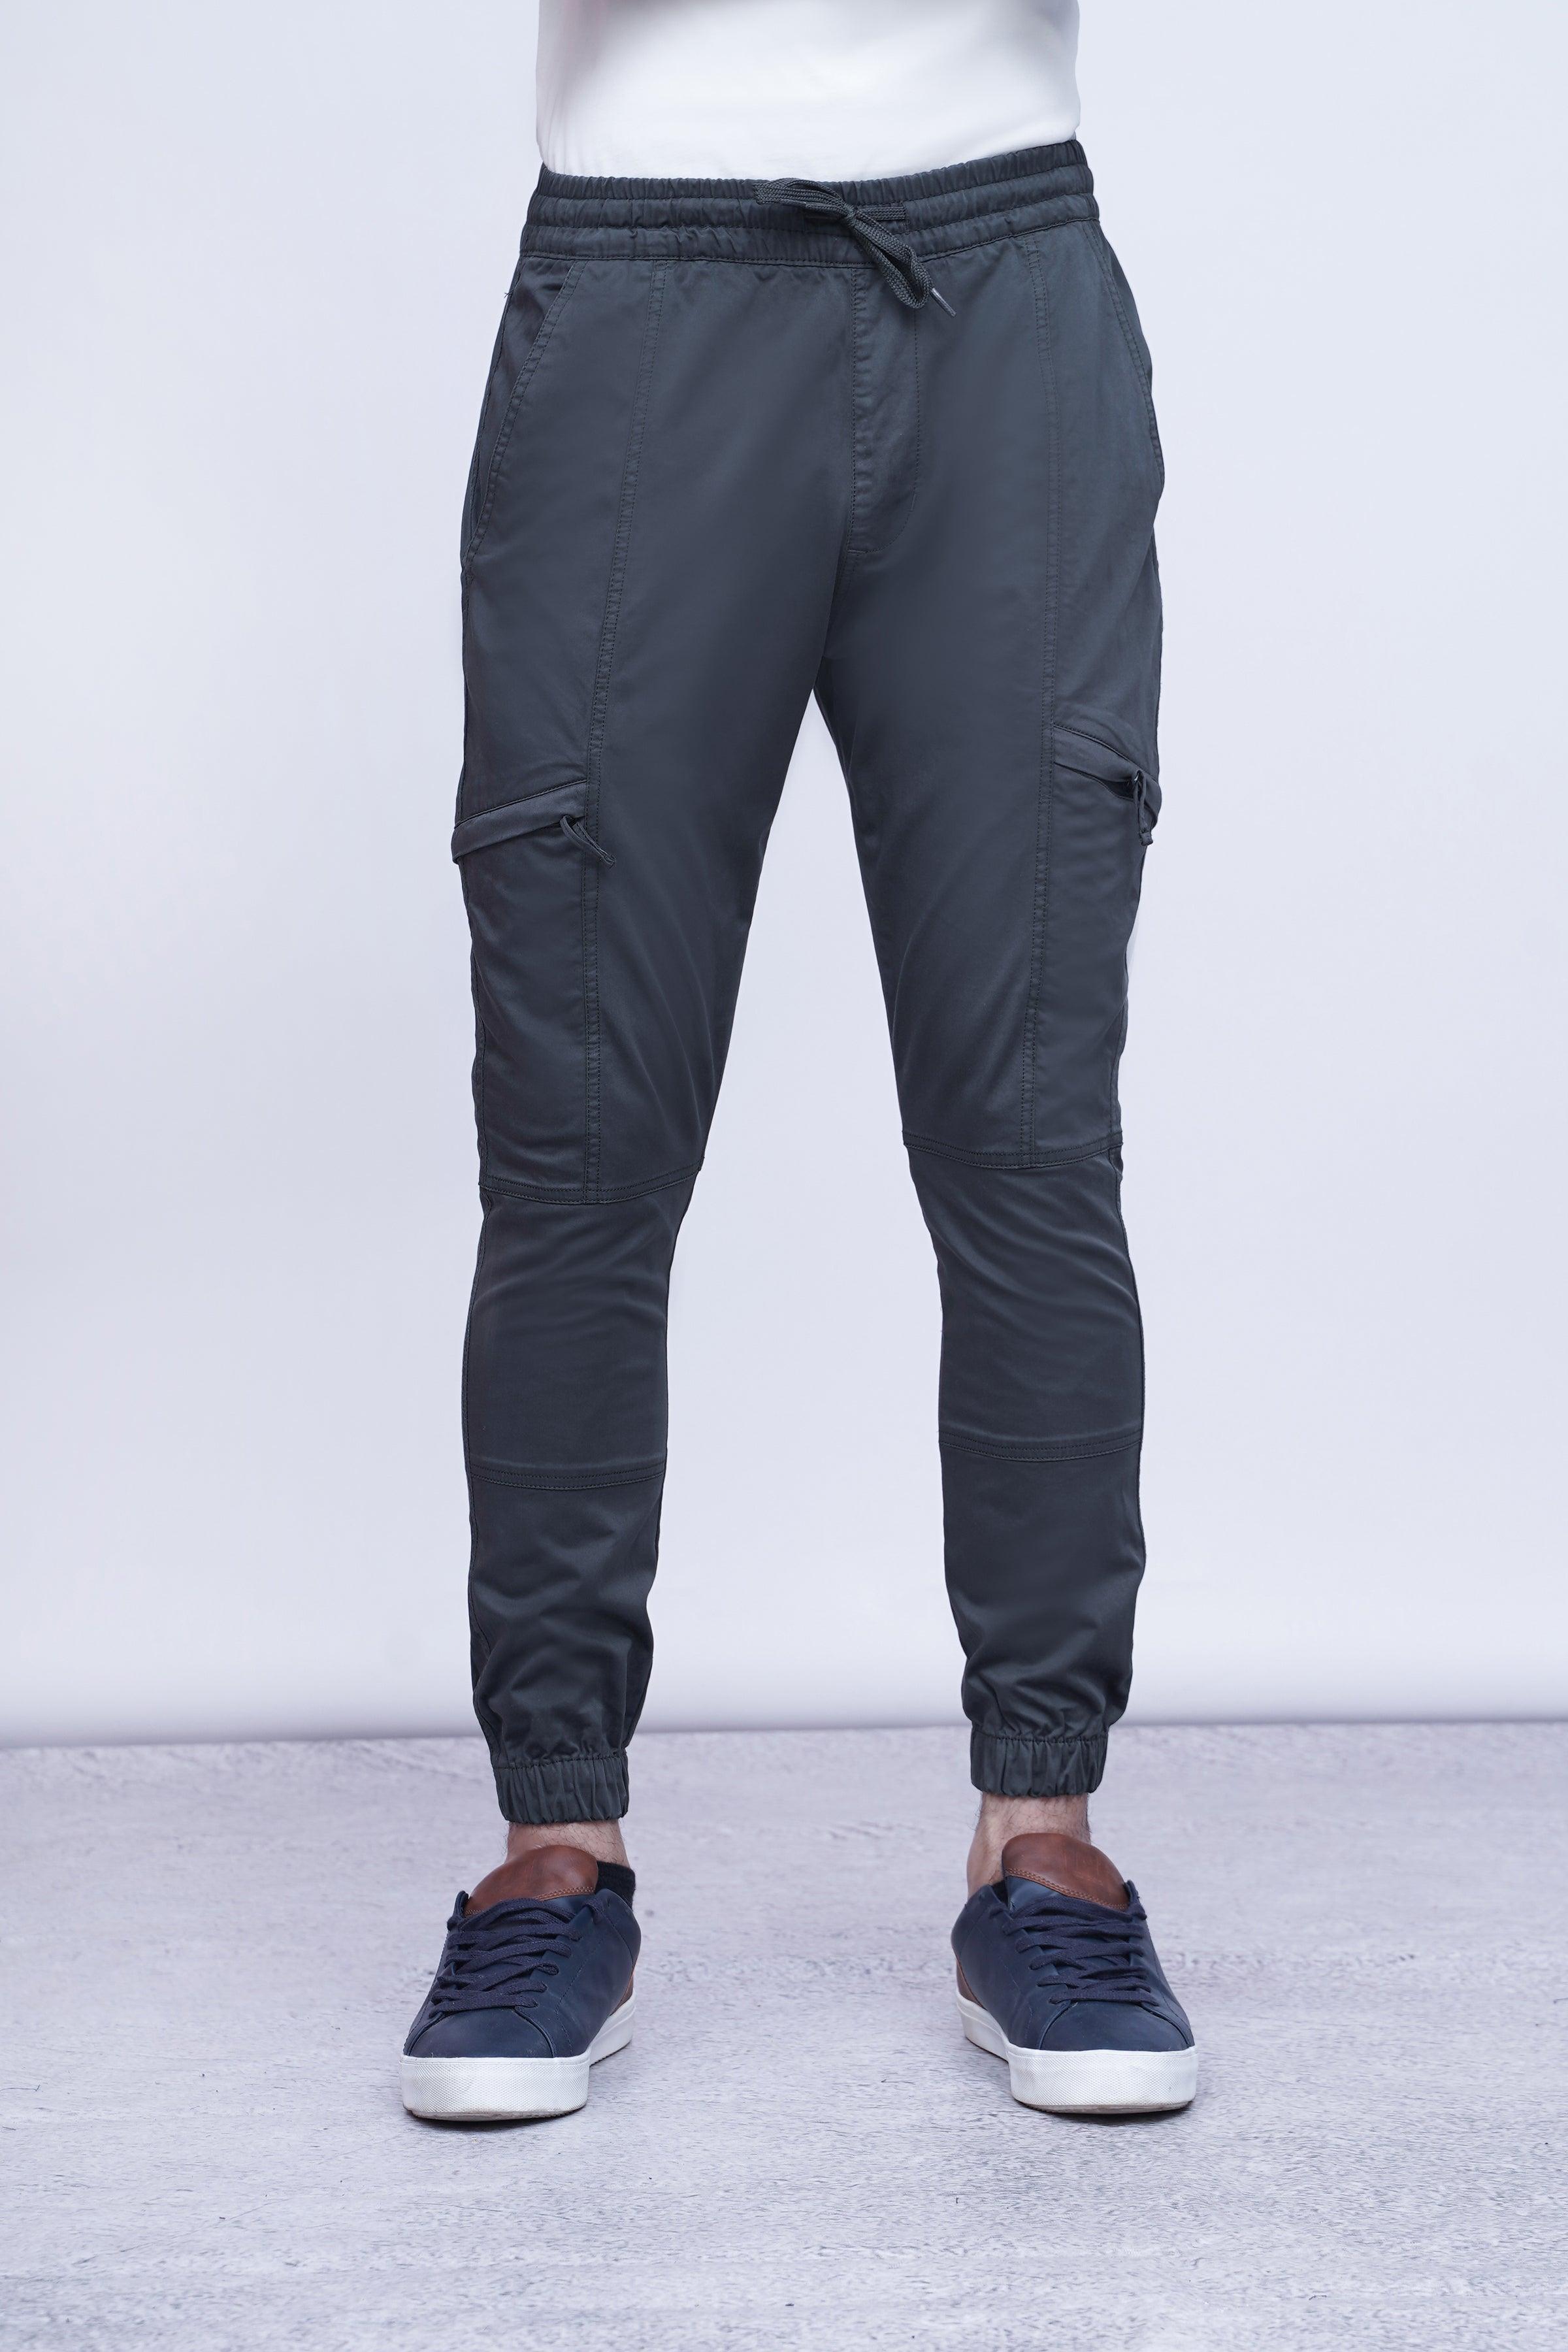 CASUAL JOGGER TROUSER OLIVE GREY at Charcoal Clothing